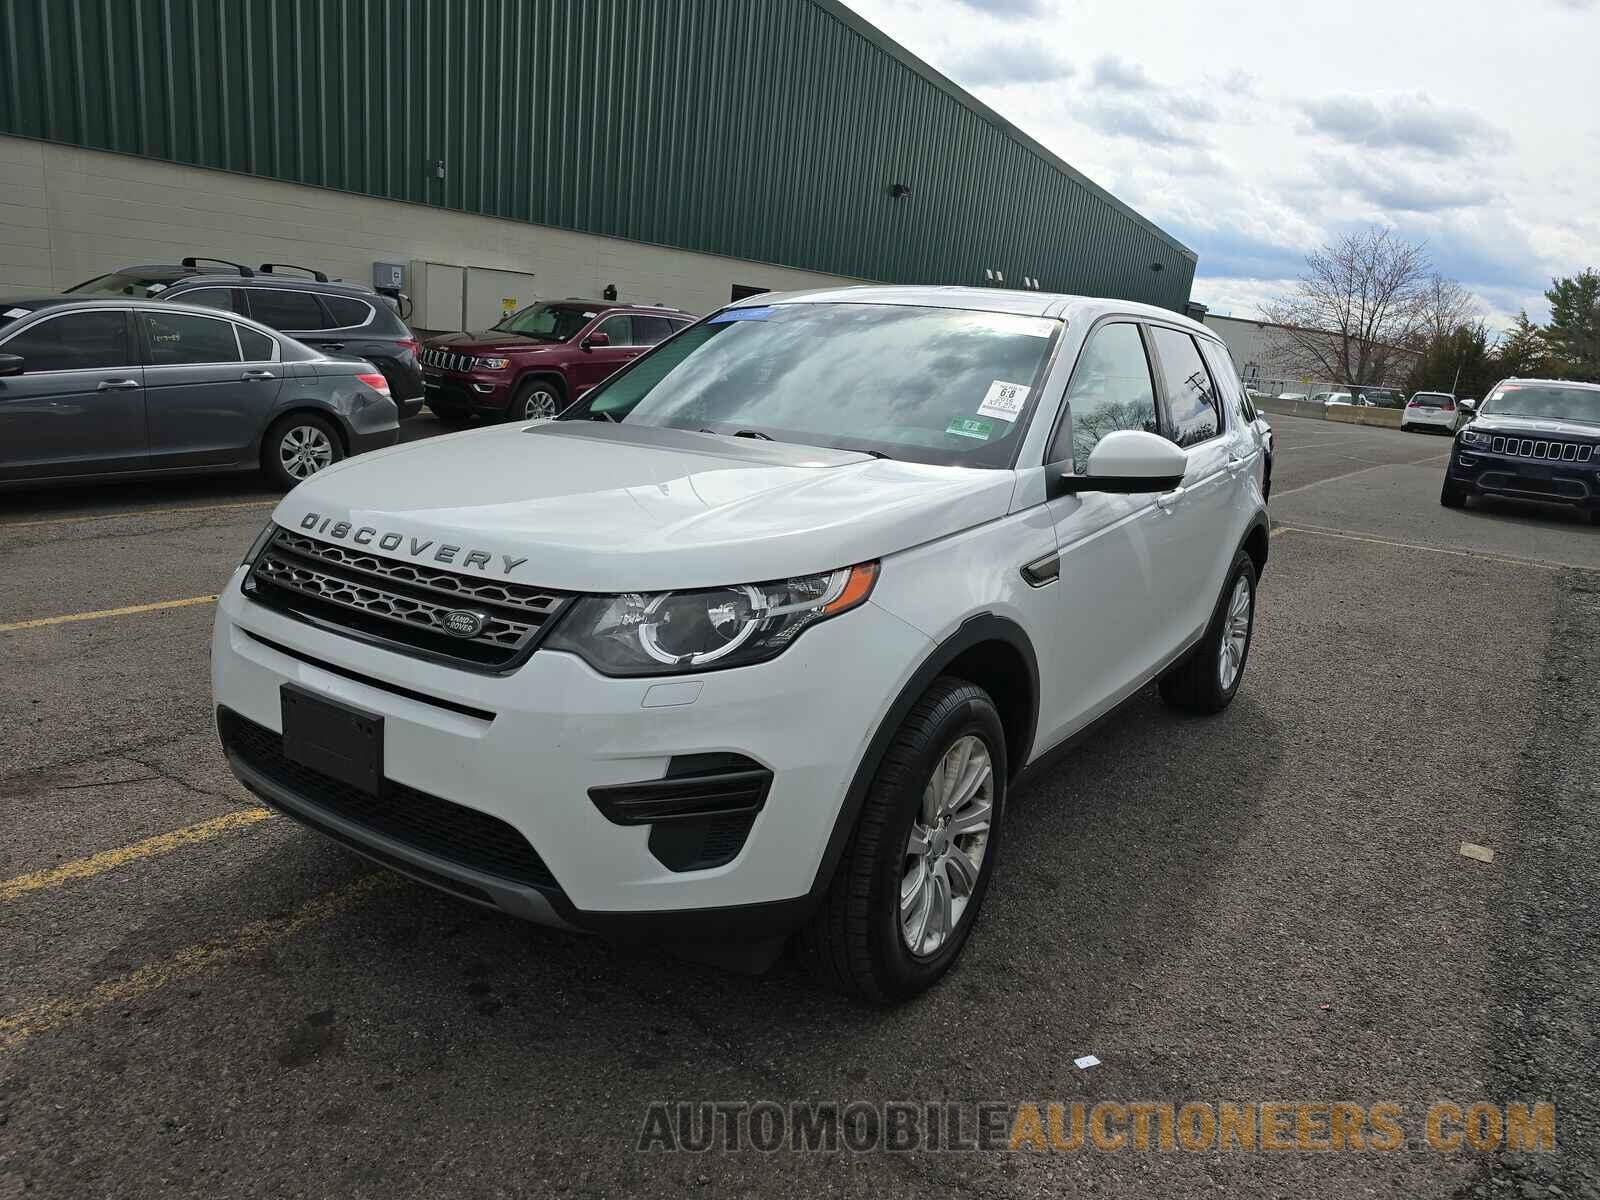 SALCP2BG8GH619660 Land Rover Discovery Sport 2016